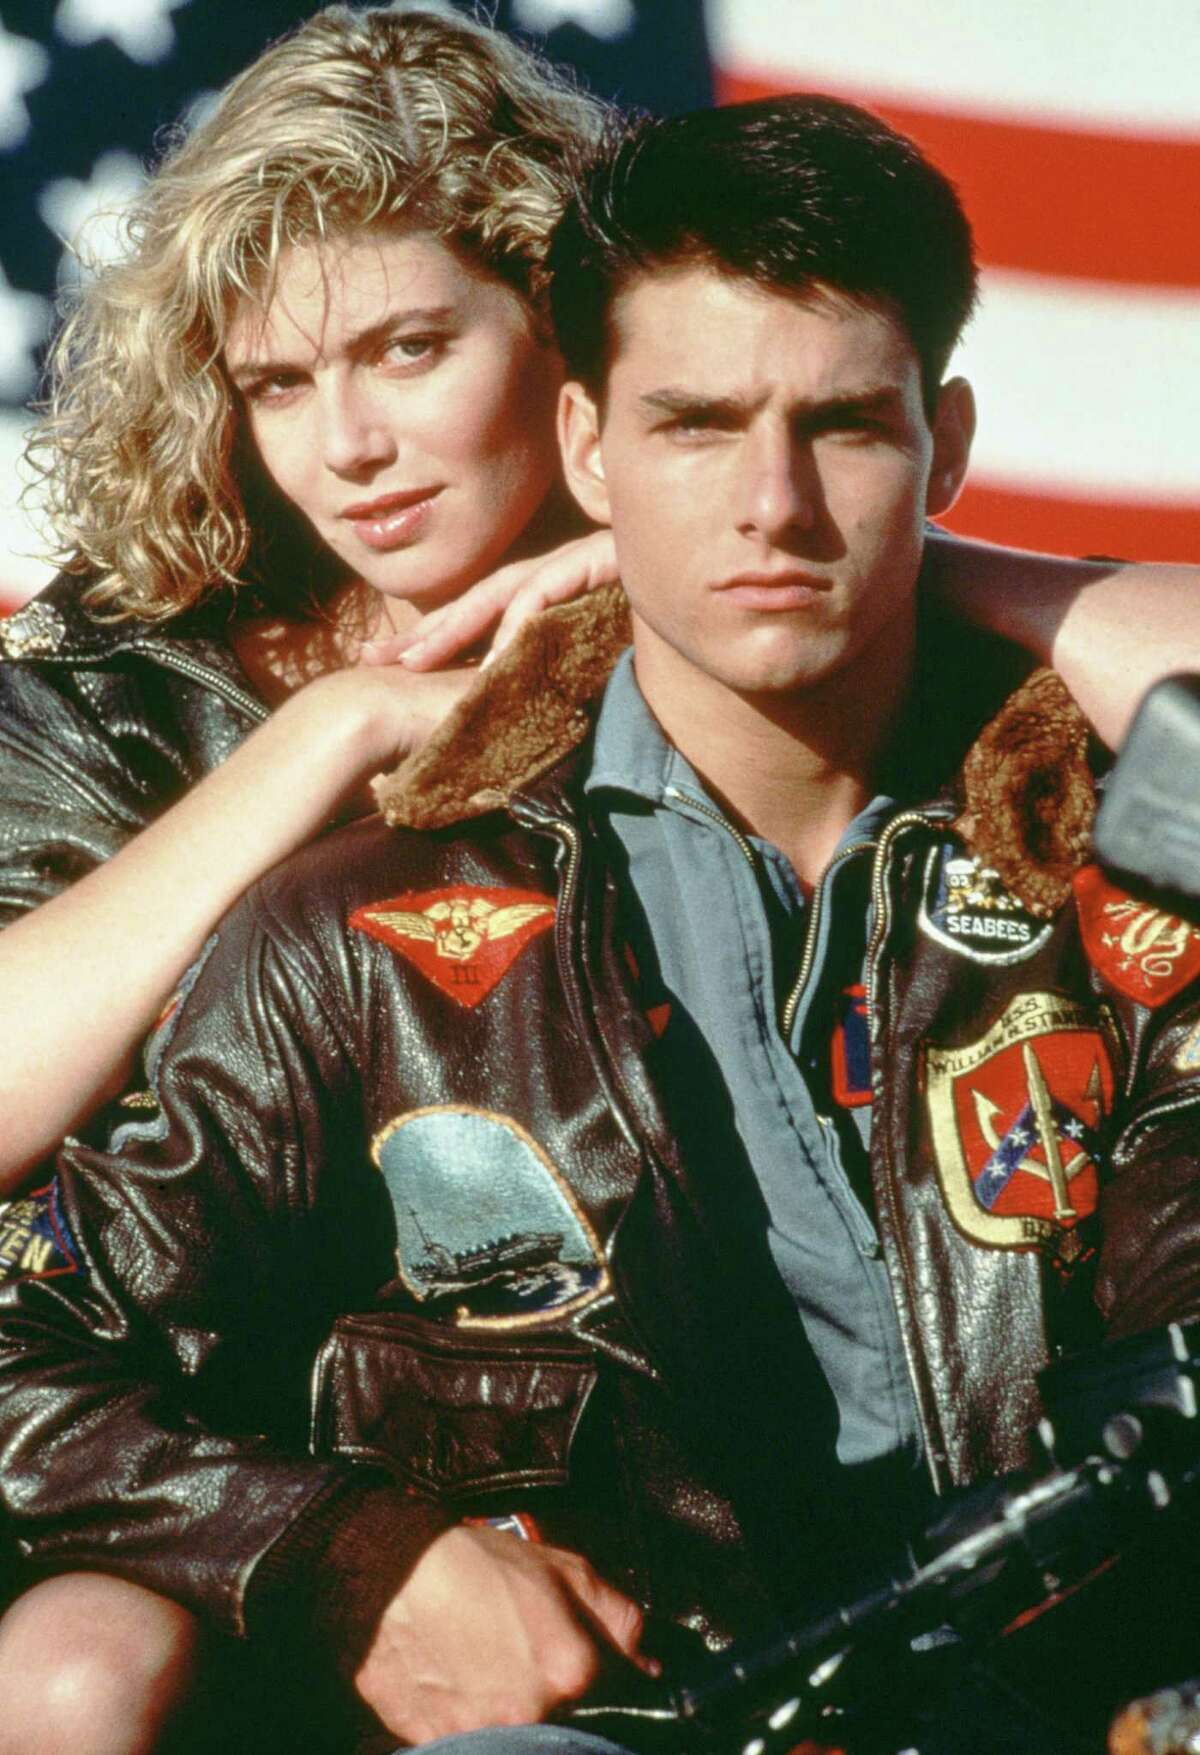 Tom Cruise and Kelly McGillis star in the 1986 military film "Top Gun." American actors Tom Cruise, as Lieutenant Pete 'Maverick' Mitchell, and Kelly McGillis, as Charlotte 'Charlie' Blackwood, in a promotional portrait for 'Top Gun', directed by Tony Scott, 1986. (Photo by Paramount Pictures/Archive Photos/Getty Images)